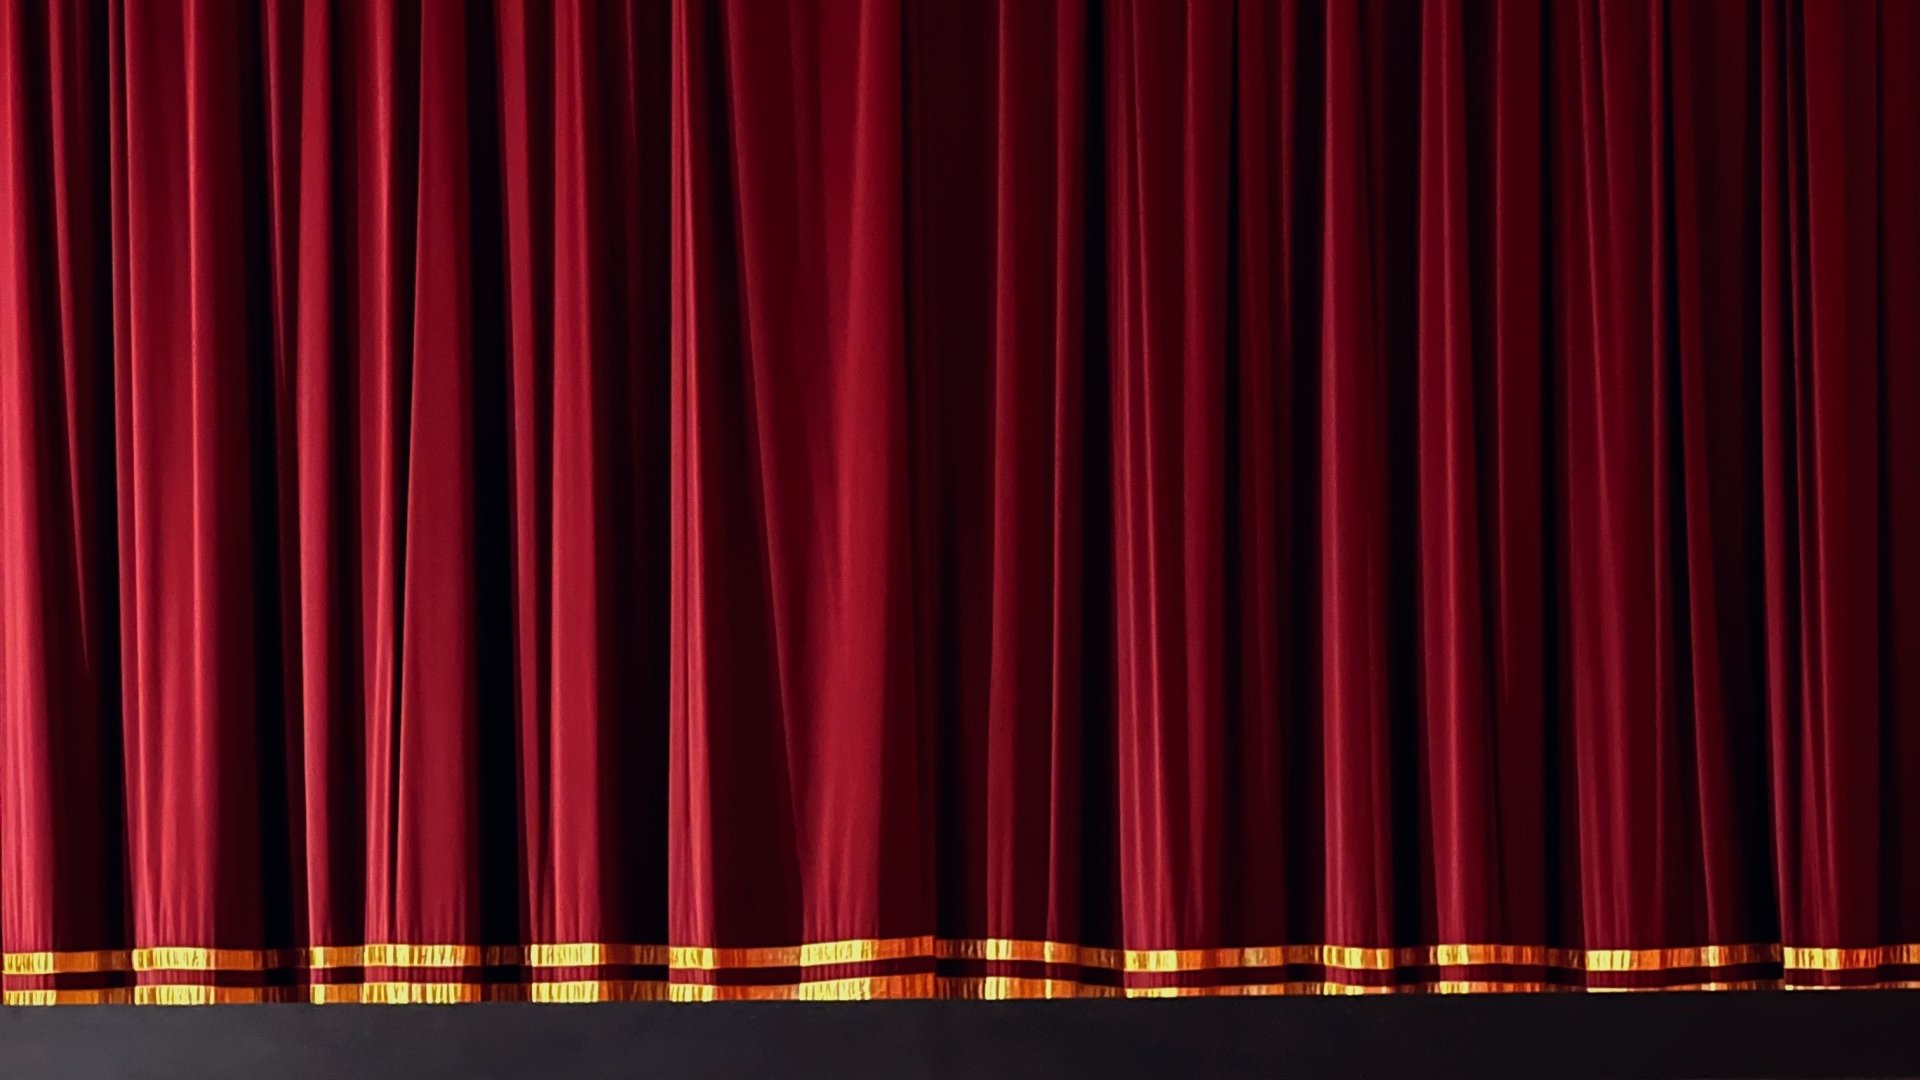 27 Curtain Pictures  Download Free Images on Unsplash